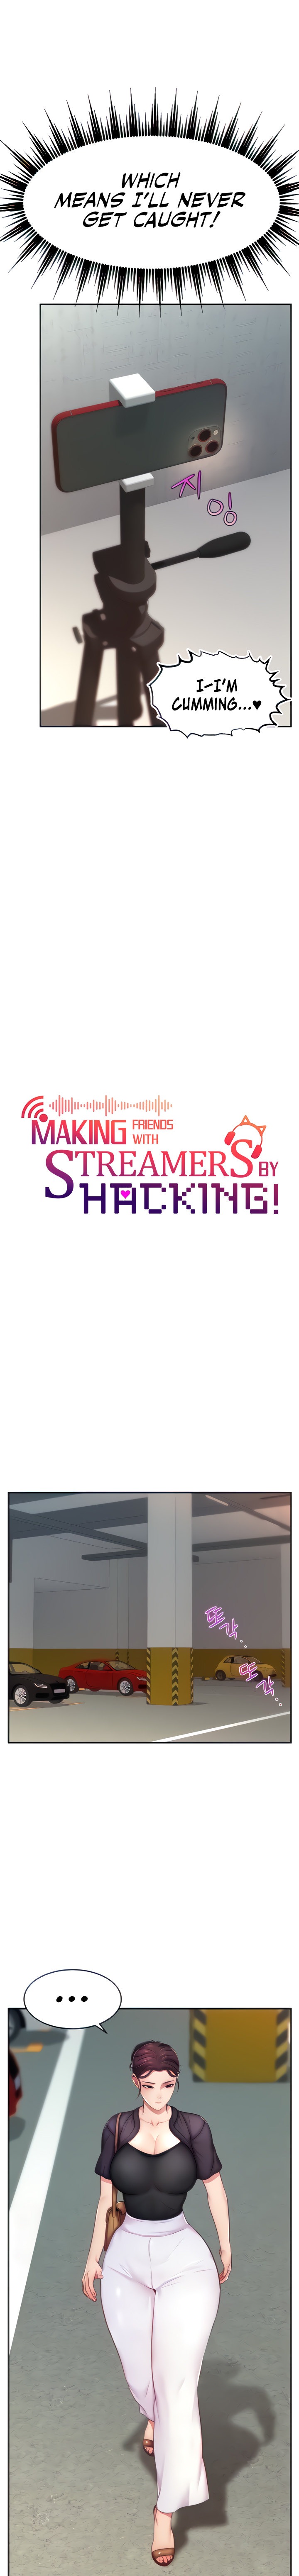 Making Friends With Streamers by Hacking! - Chapter 8 Page 3